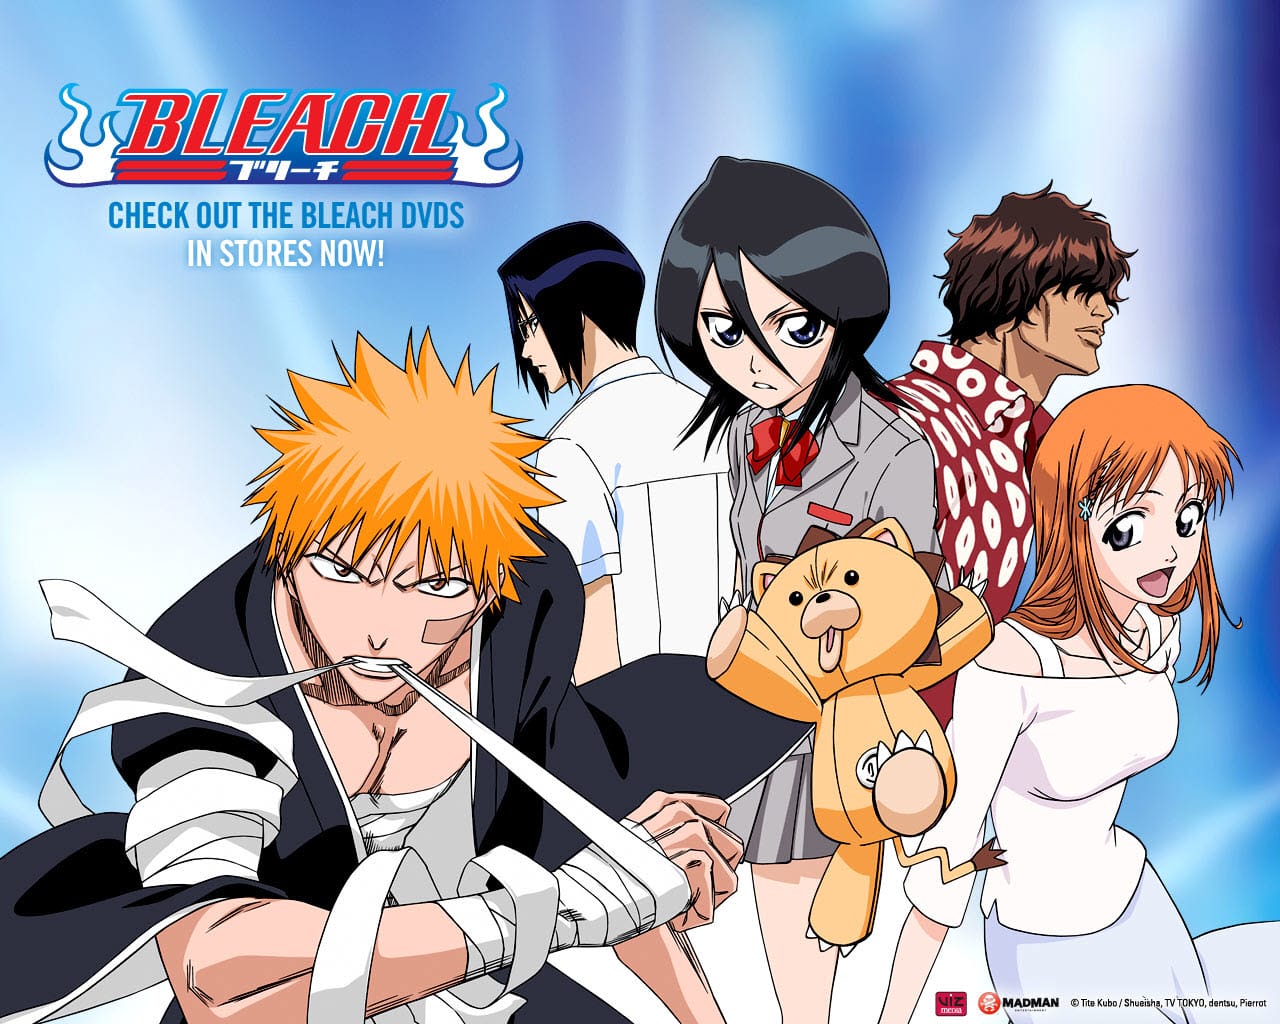 Warner Bros pushing ahead with Bleach live action movie